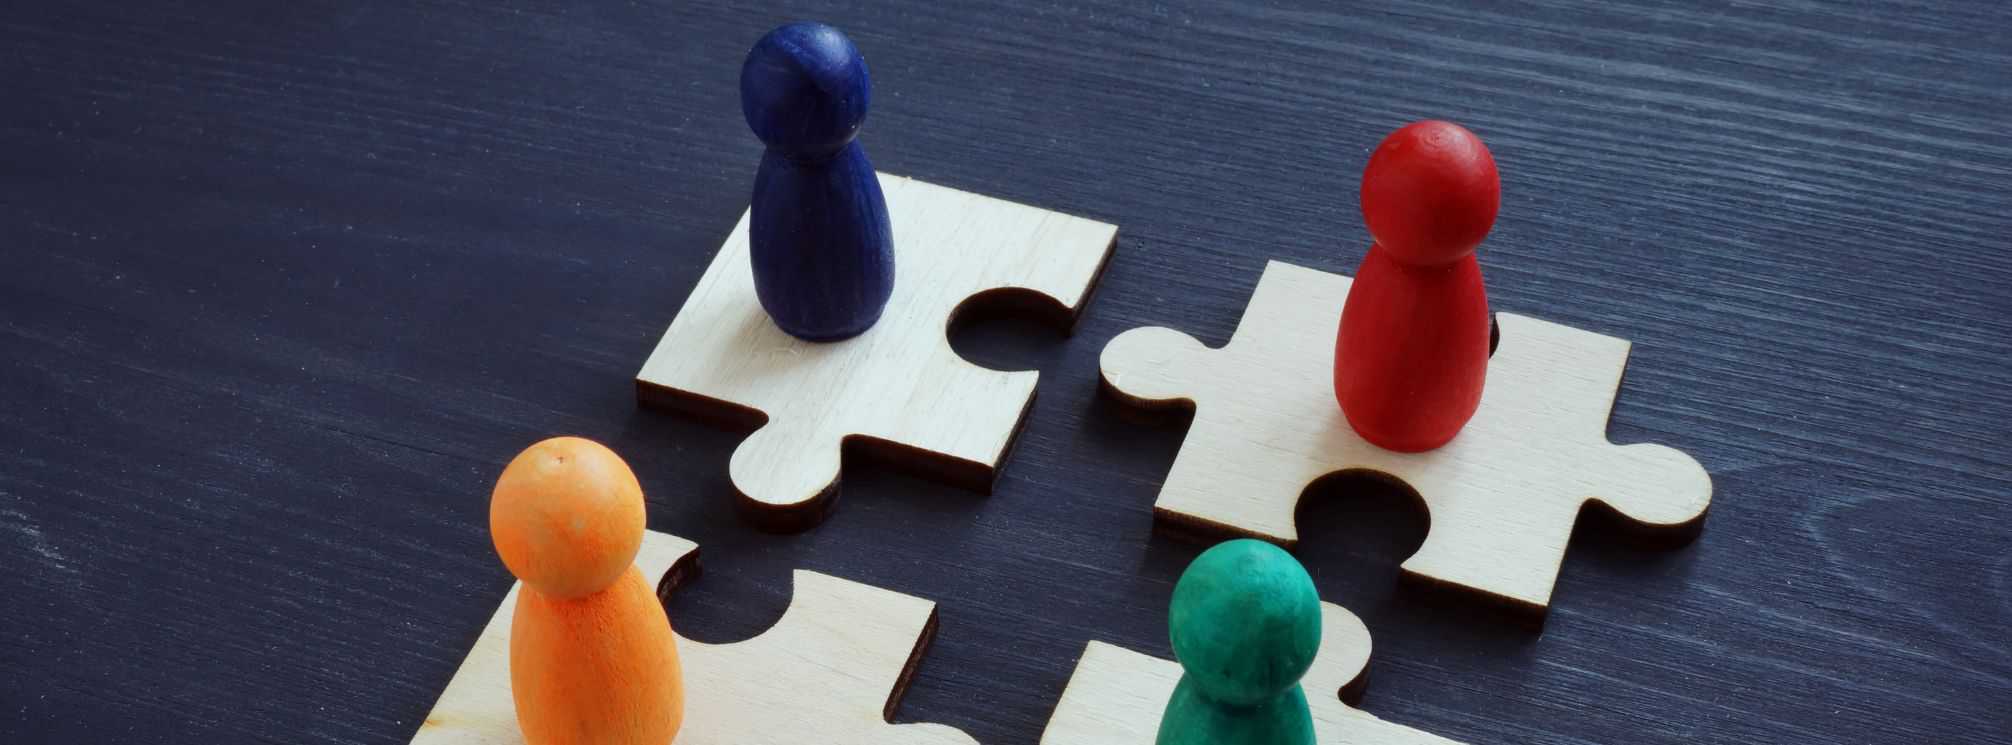 4 puzzle pieces aligned to connect with multi-color wooden pegs on top of them